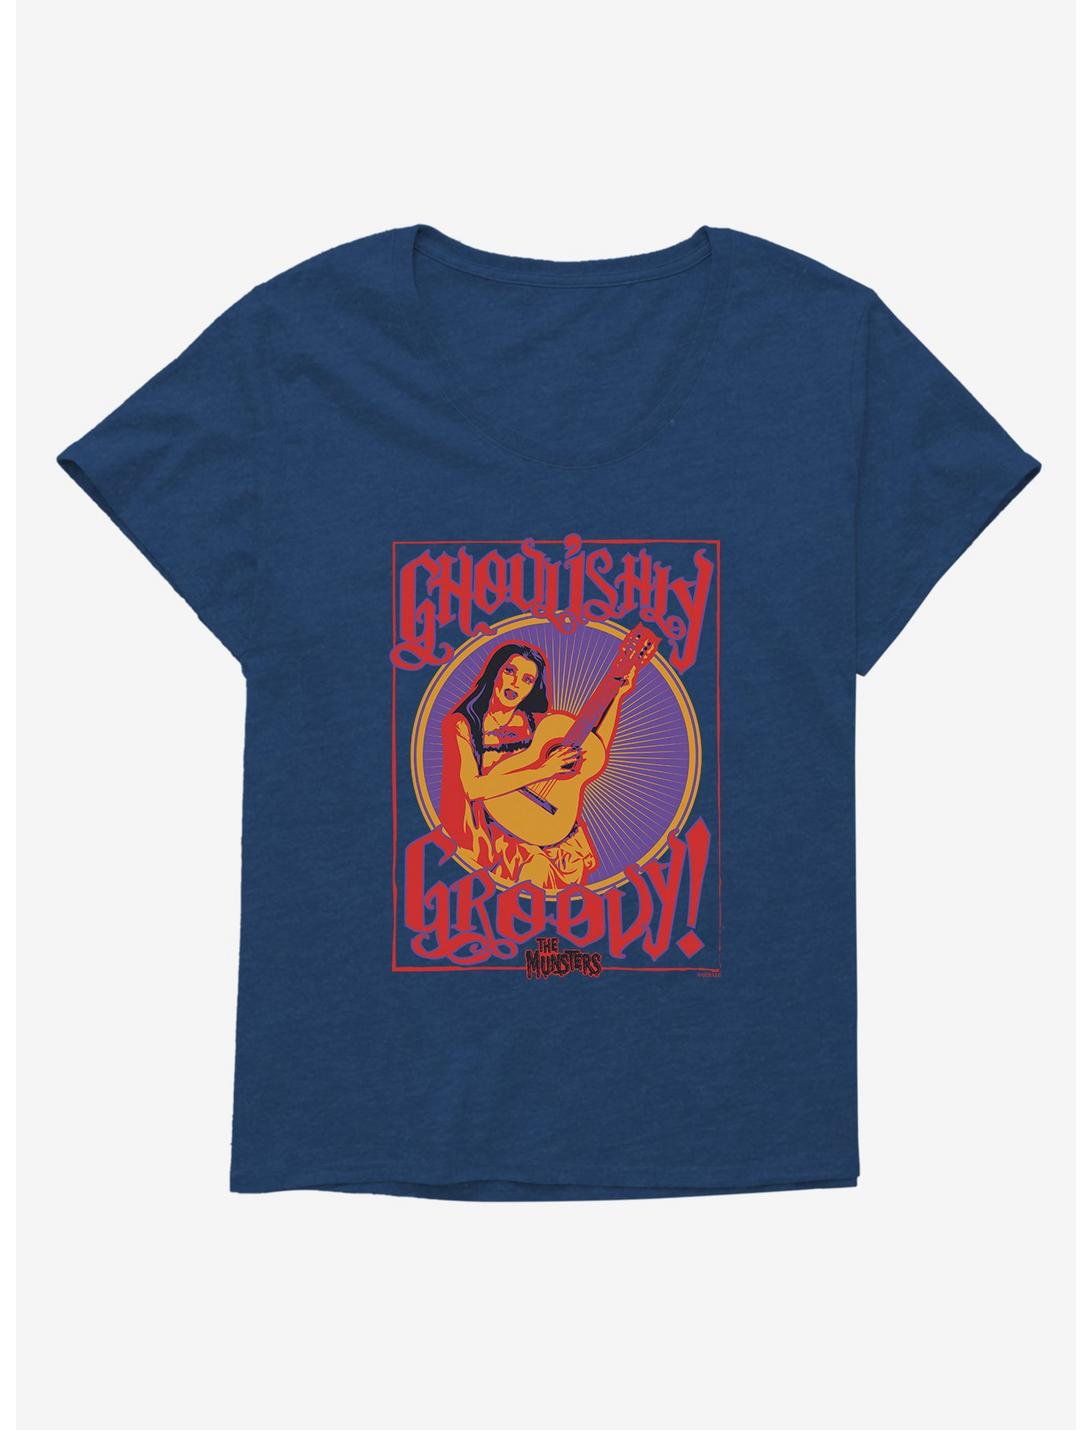 Plus Size The Munsters Lily Ghoulishly Groovy Womens T-Shirt Plus Size, , hi-res